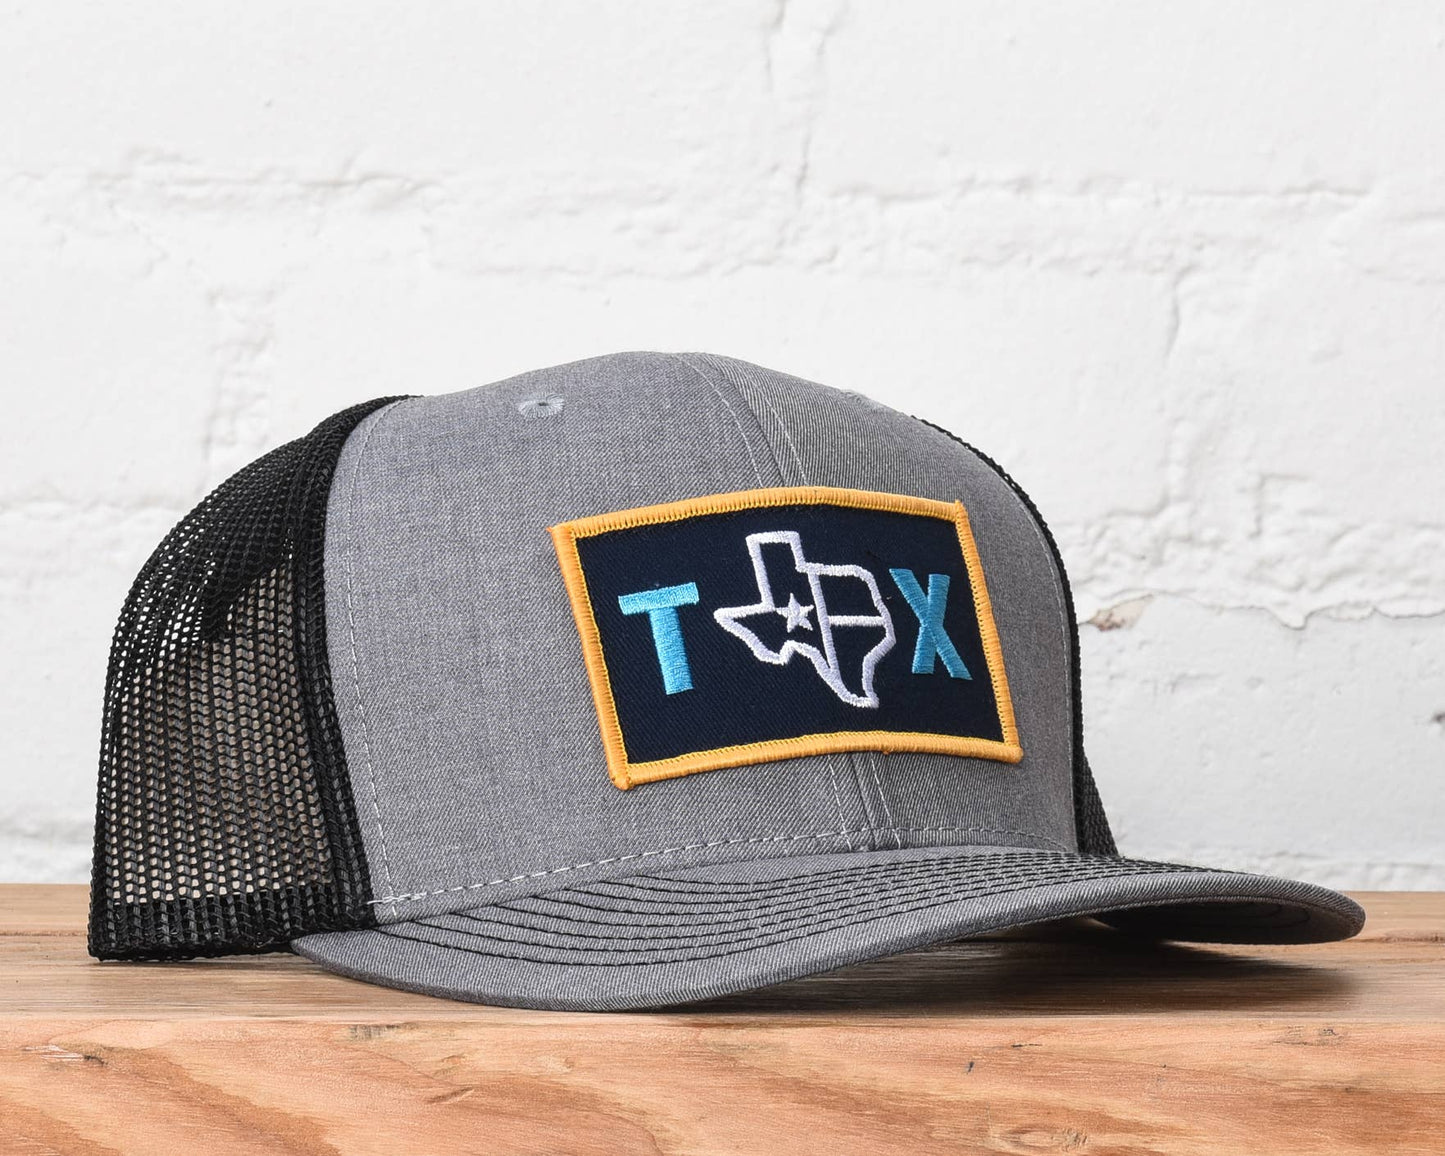 State of Texas Snapback Hat